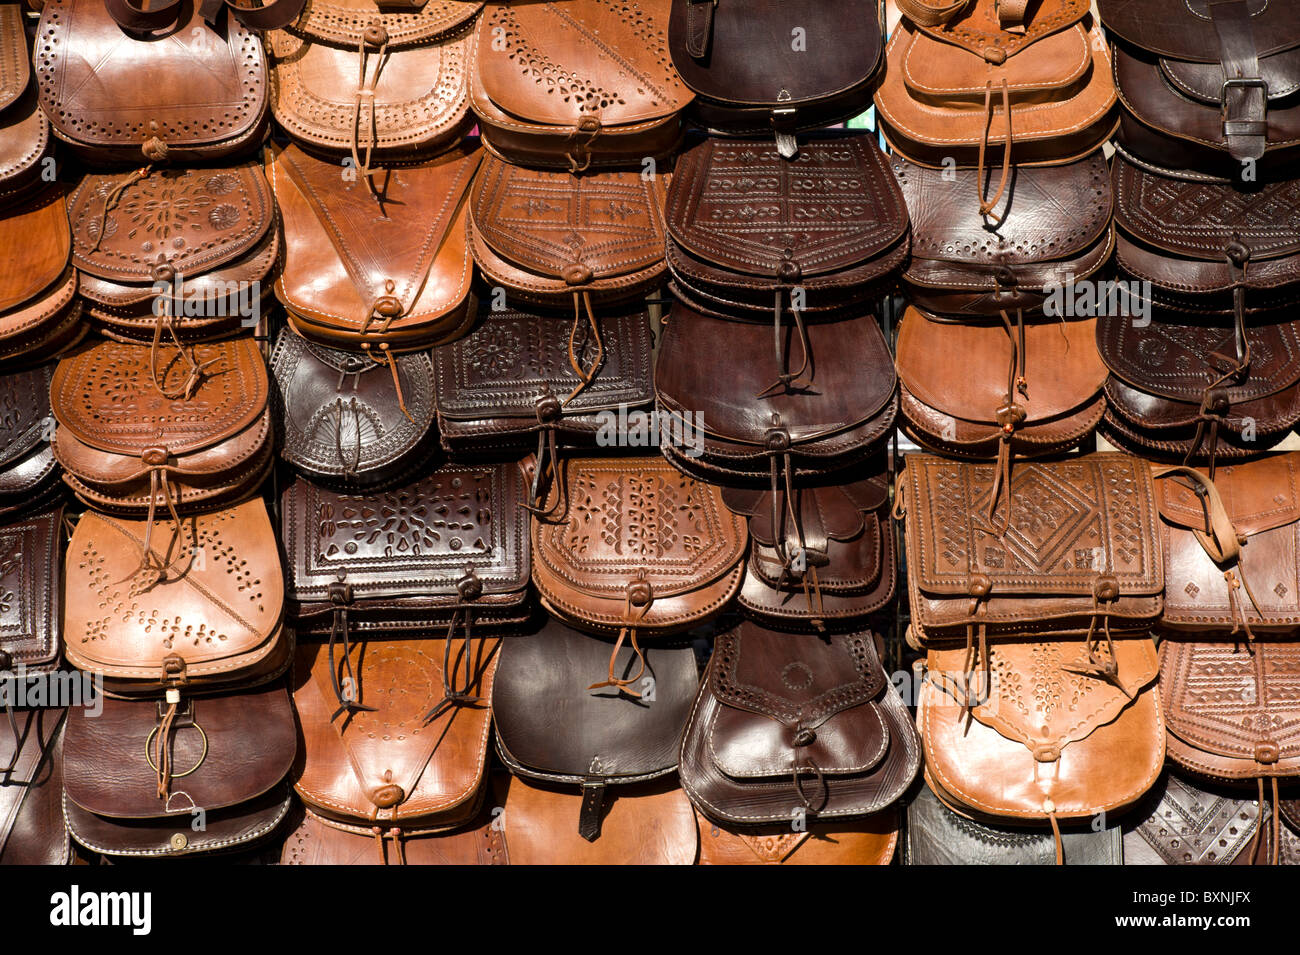 Handmade leather bags on market stall, Spain Stock Photo